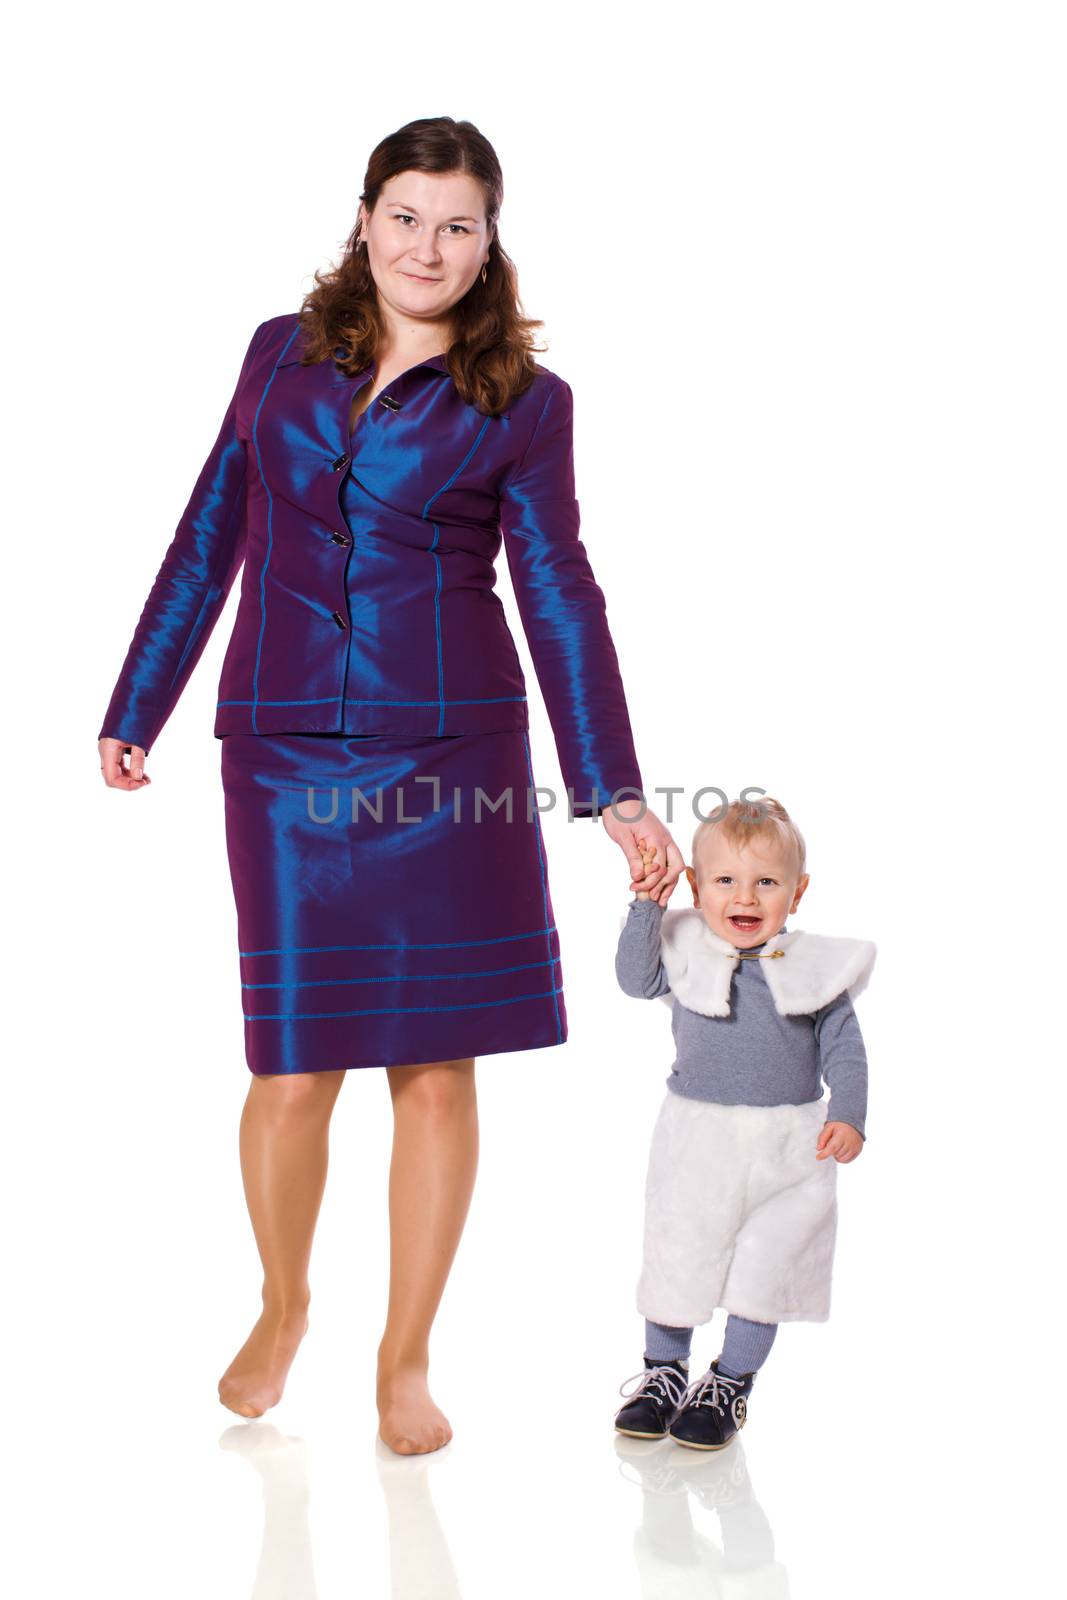 Mother holding little son walking together isolated